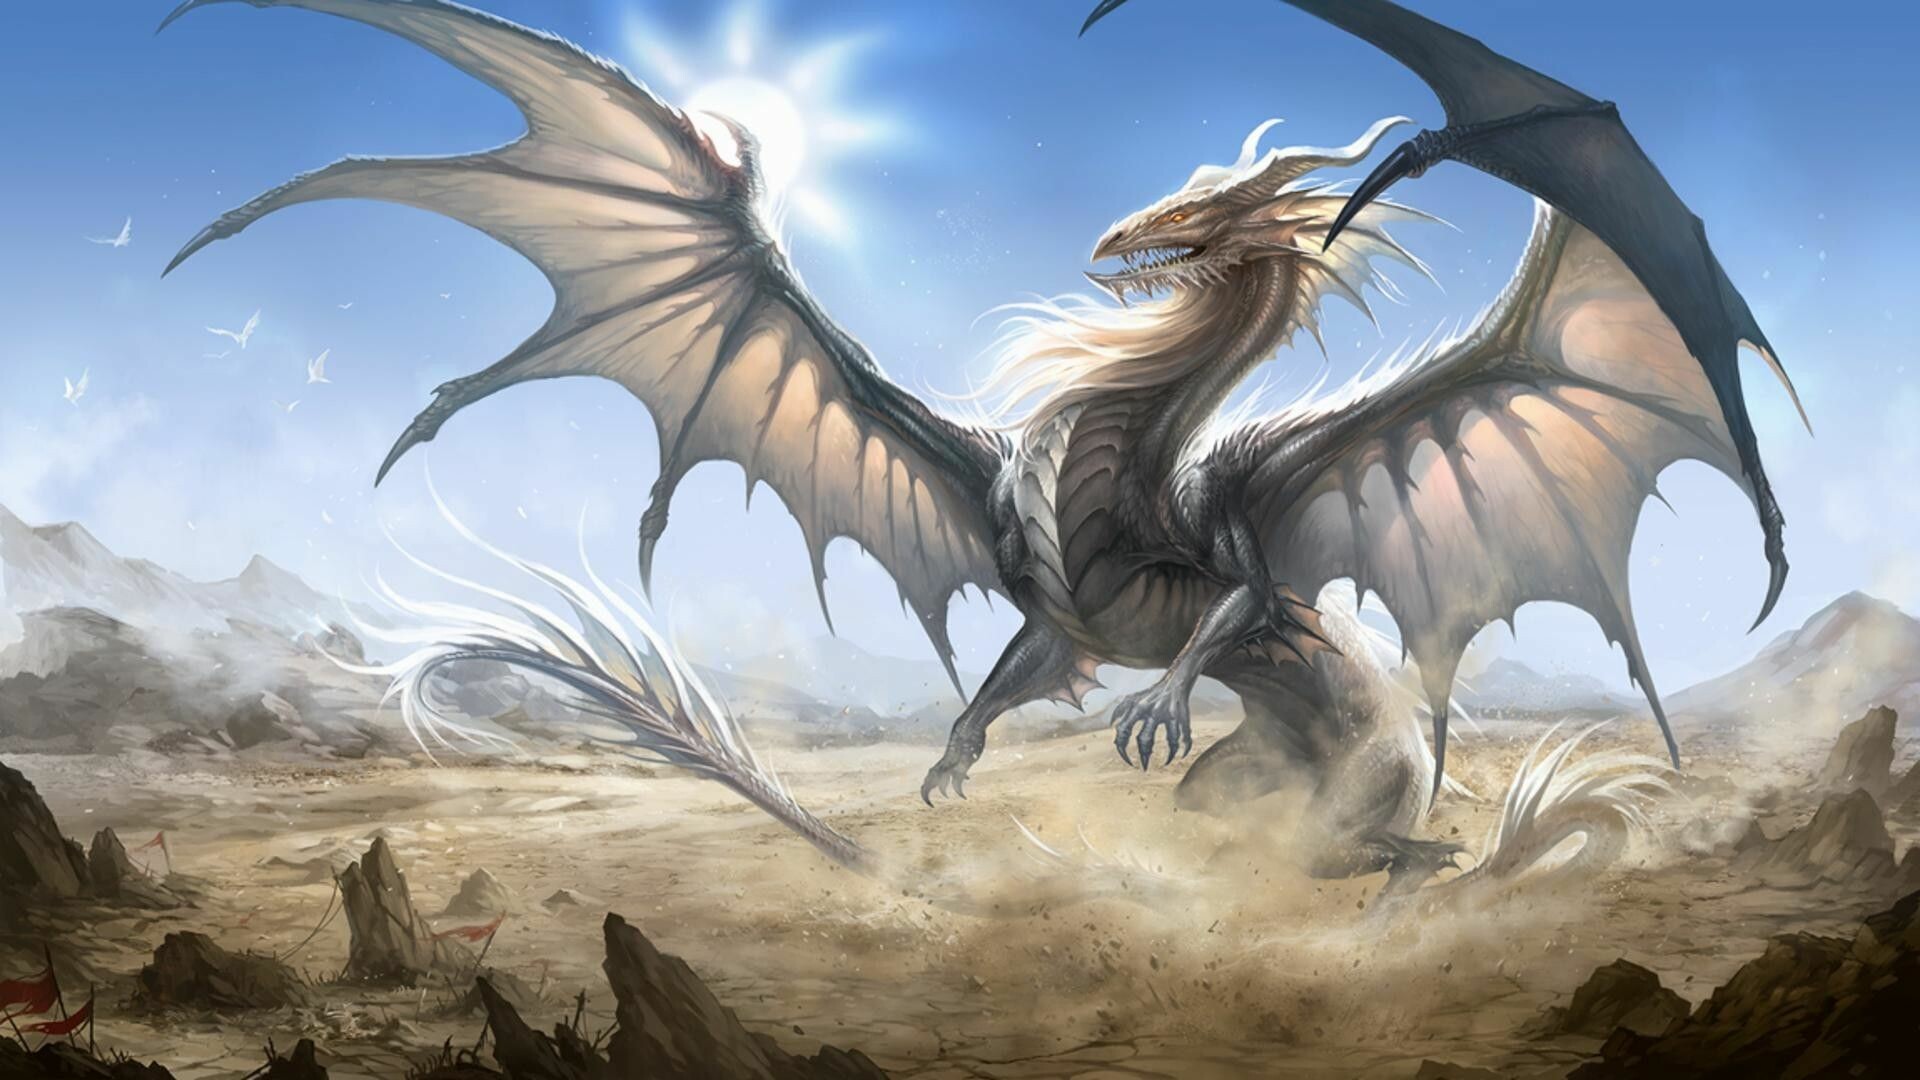 Dragon: A type of serpent, was present on the medieval coat of arms as a decoration. 1920x1080 Full HD Background.